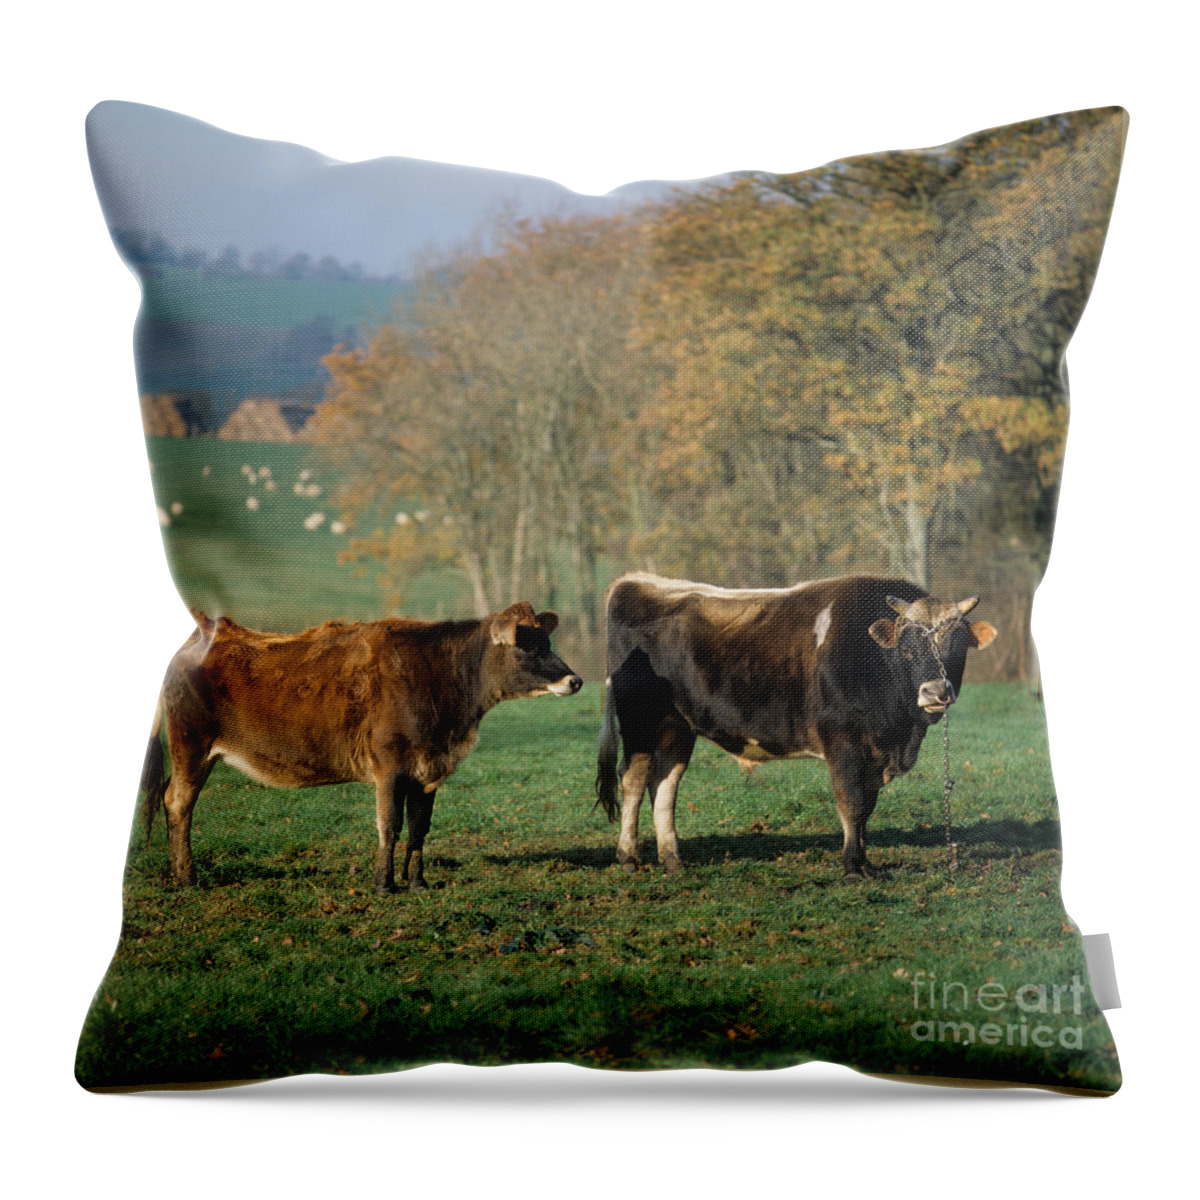 Jersey Cow Throw Pillow featuring the photograph Jersey Bull And Heifer by Nigel Cattlin